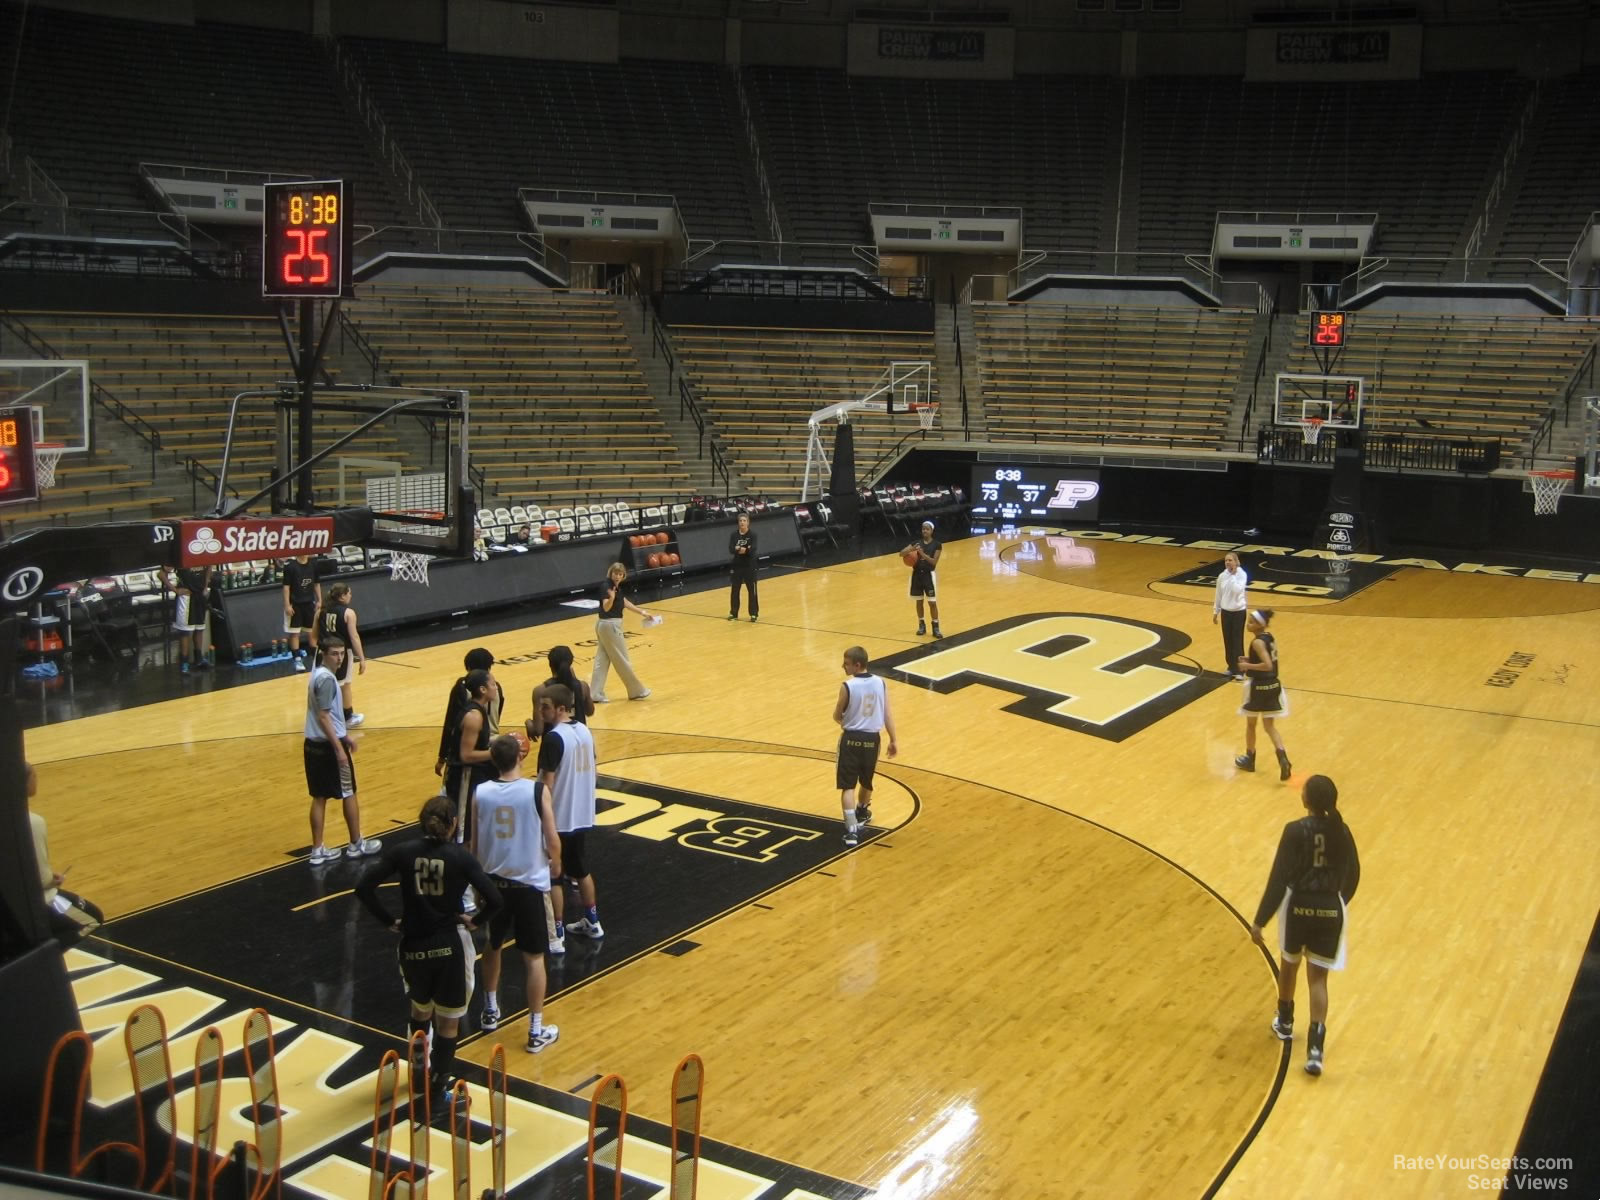 section 13, row 10 seat view  - mackey arena